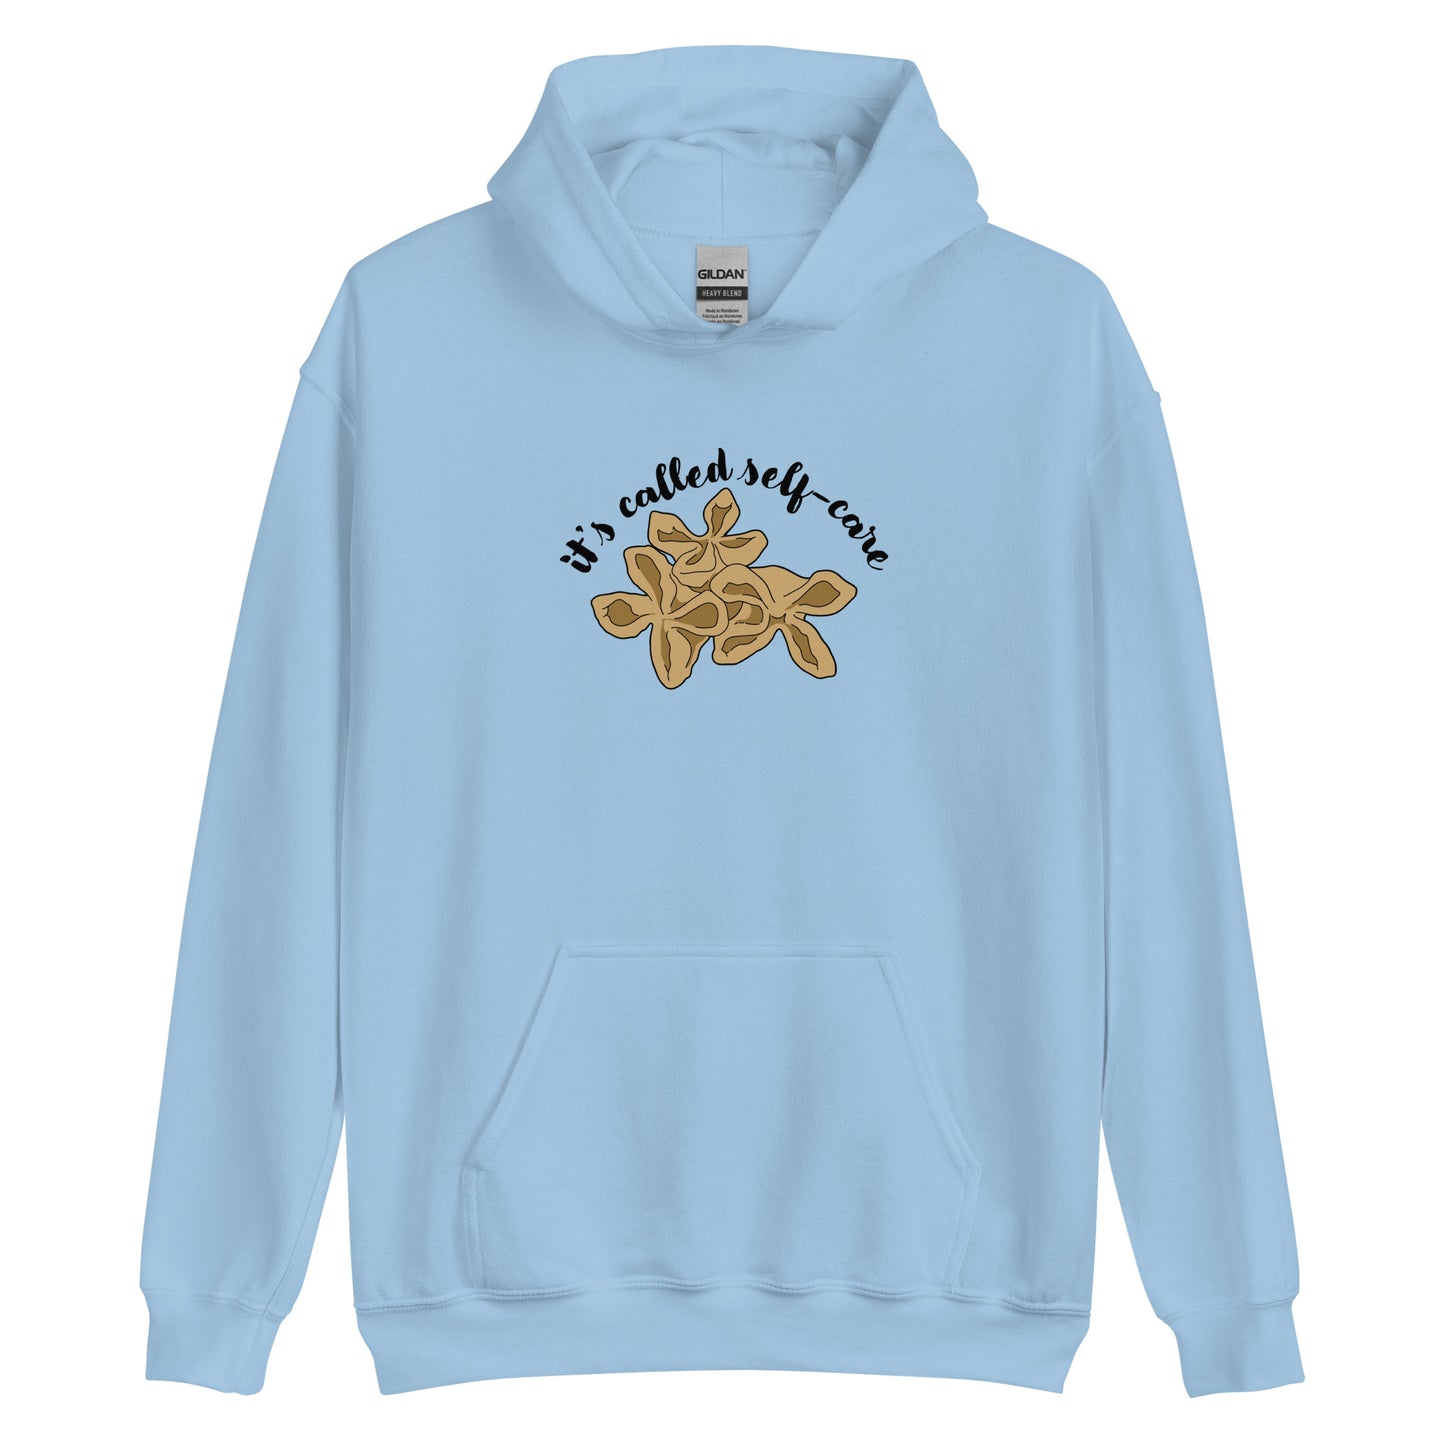 A light blue hooded sweatshirt featuring an illustration of three pieces of crab rangoon. Text in an arc above the crab rangoon reads "it's called self-care" in a cursive script.